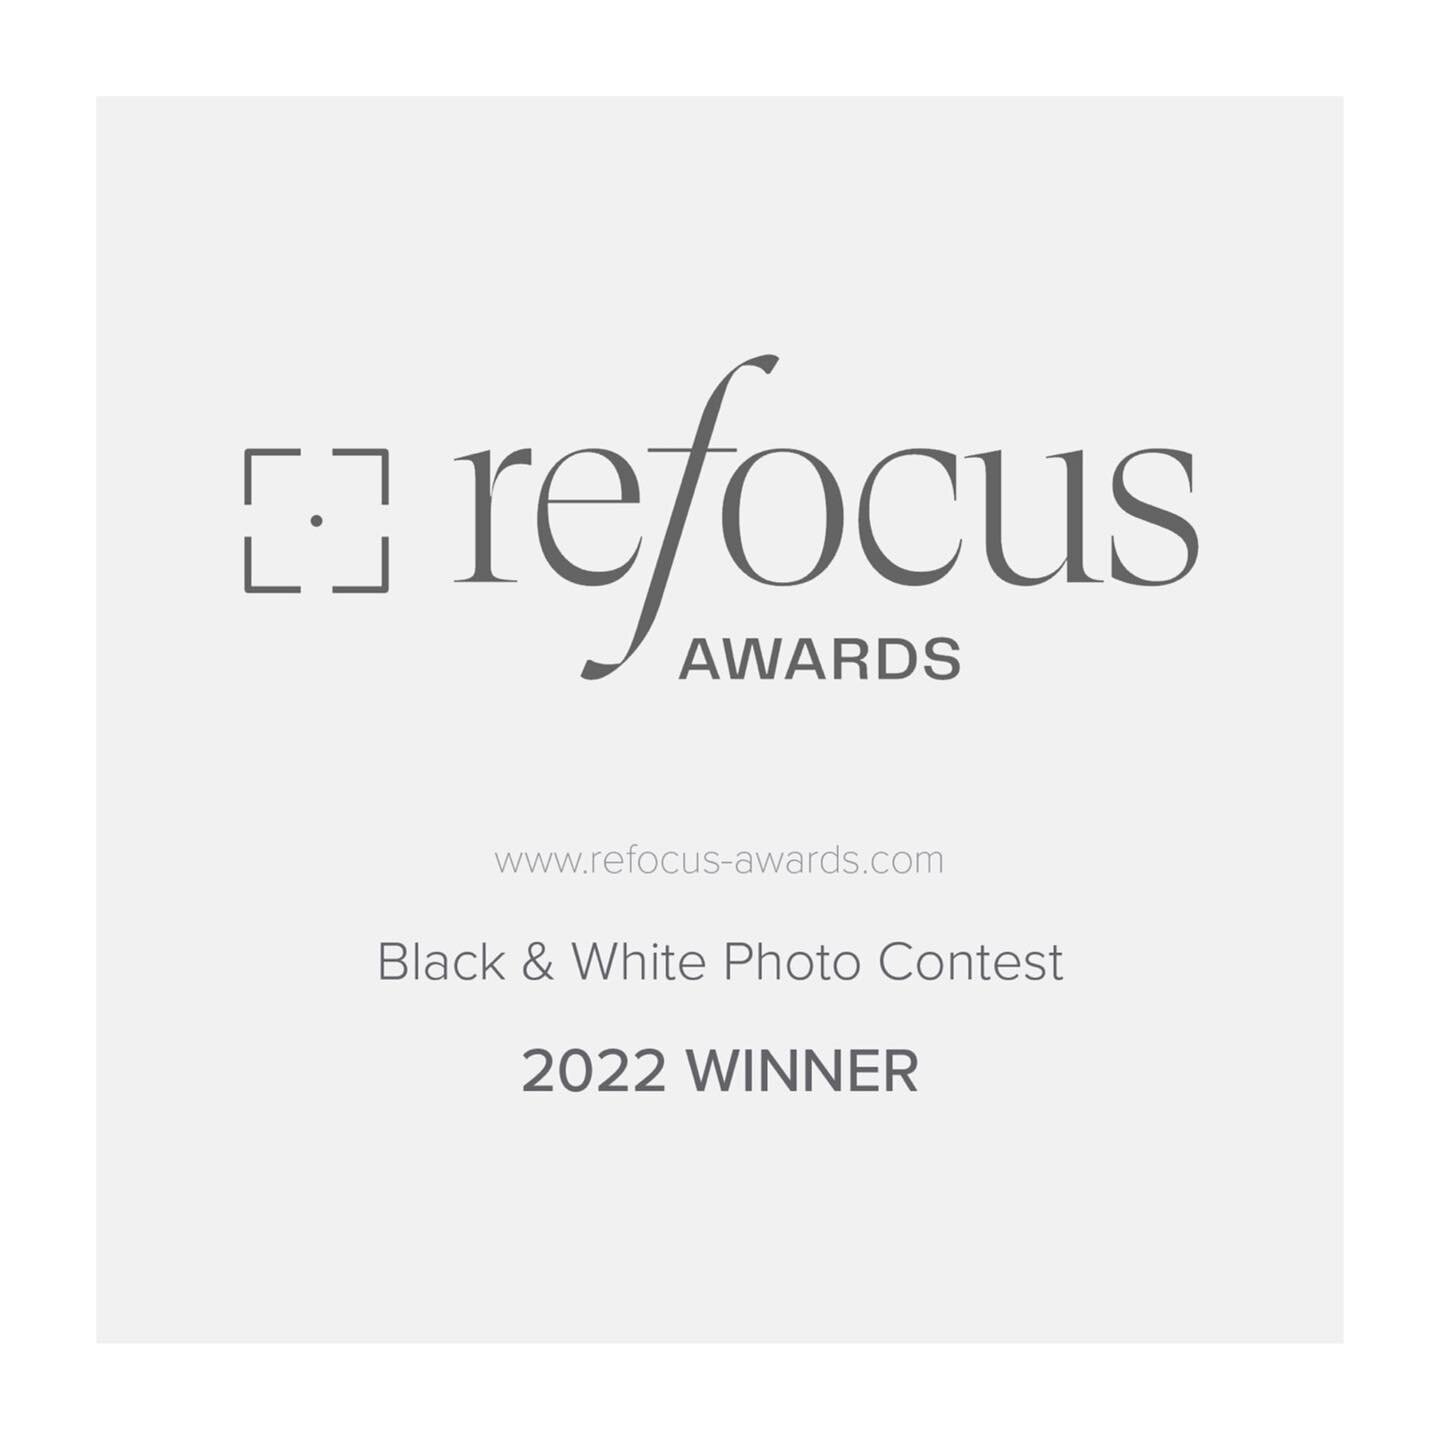 We are thrilled to share that in the 2022 Black &amp; White @refocus.awards, we received 2nd place in the Nature category for our photo &ldquo;Fall Transitions&rdquo; and 3rd place in the Minimalism category for our series &ldquo;Layers of the Sound.